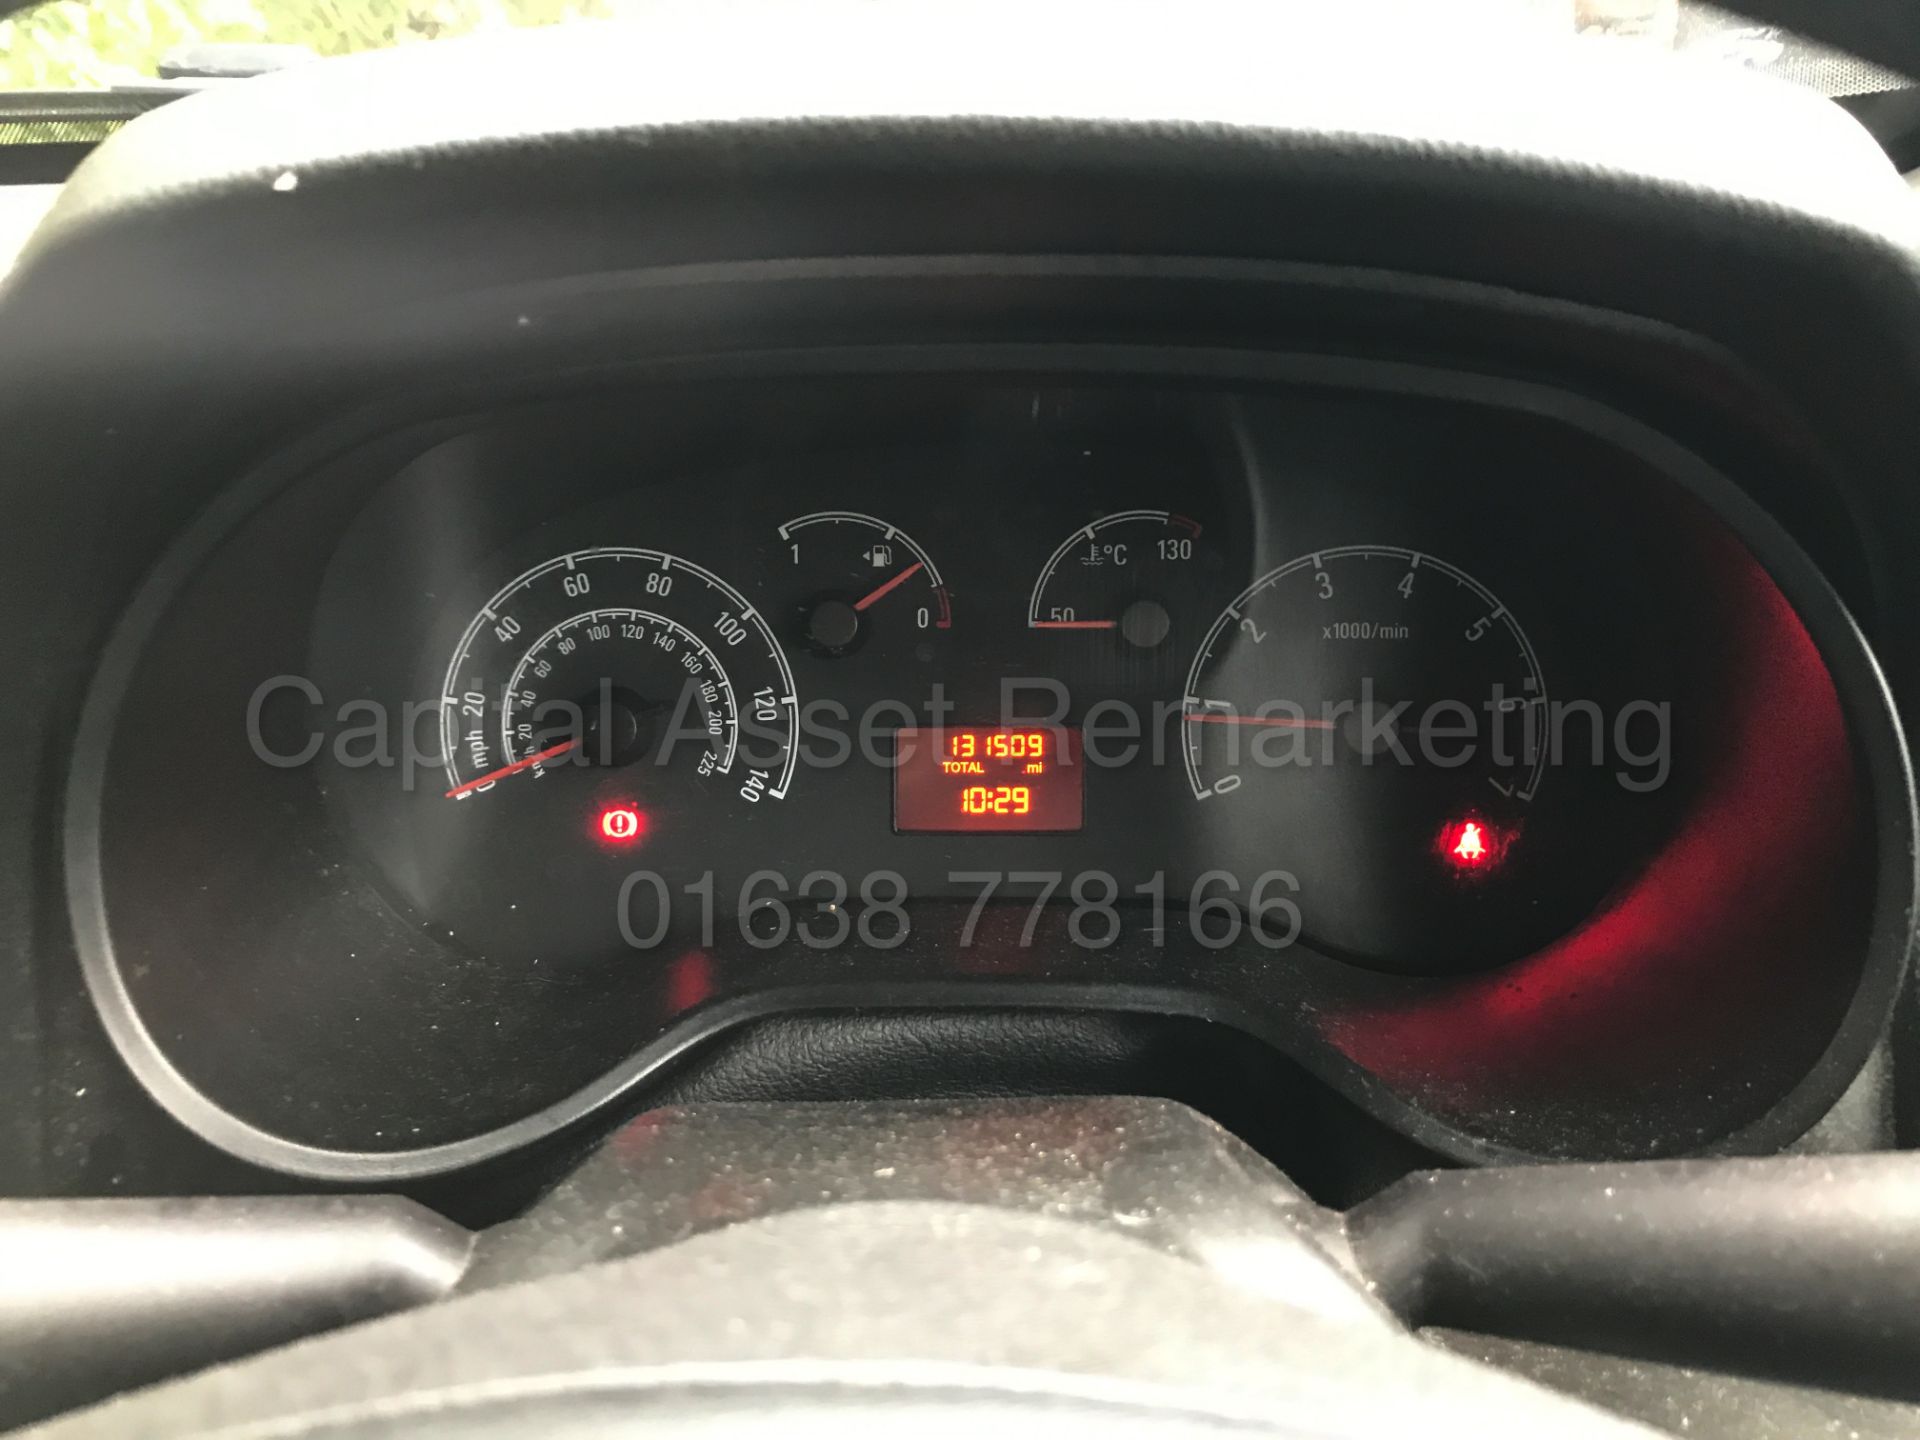 VAUXHALL COMBO 2000 L1H1 (2015 MODEL) 'CDTI - 90 BHP' (1 FORMER COMPANY OWNER FROM NEW) *50 MPG+* - Image 25 of 25